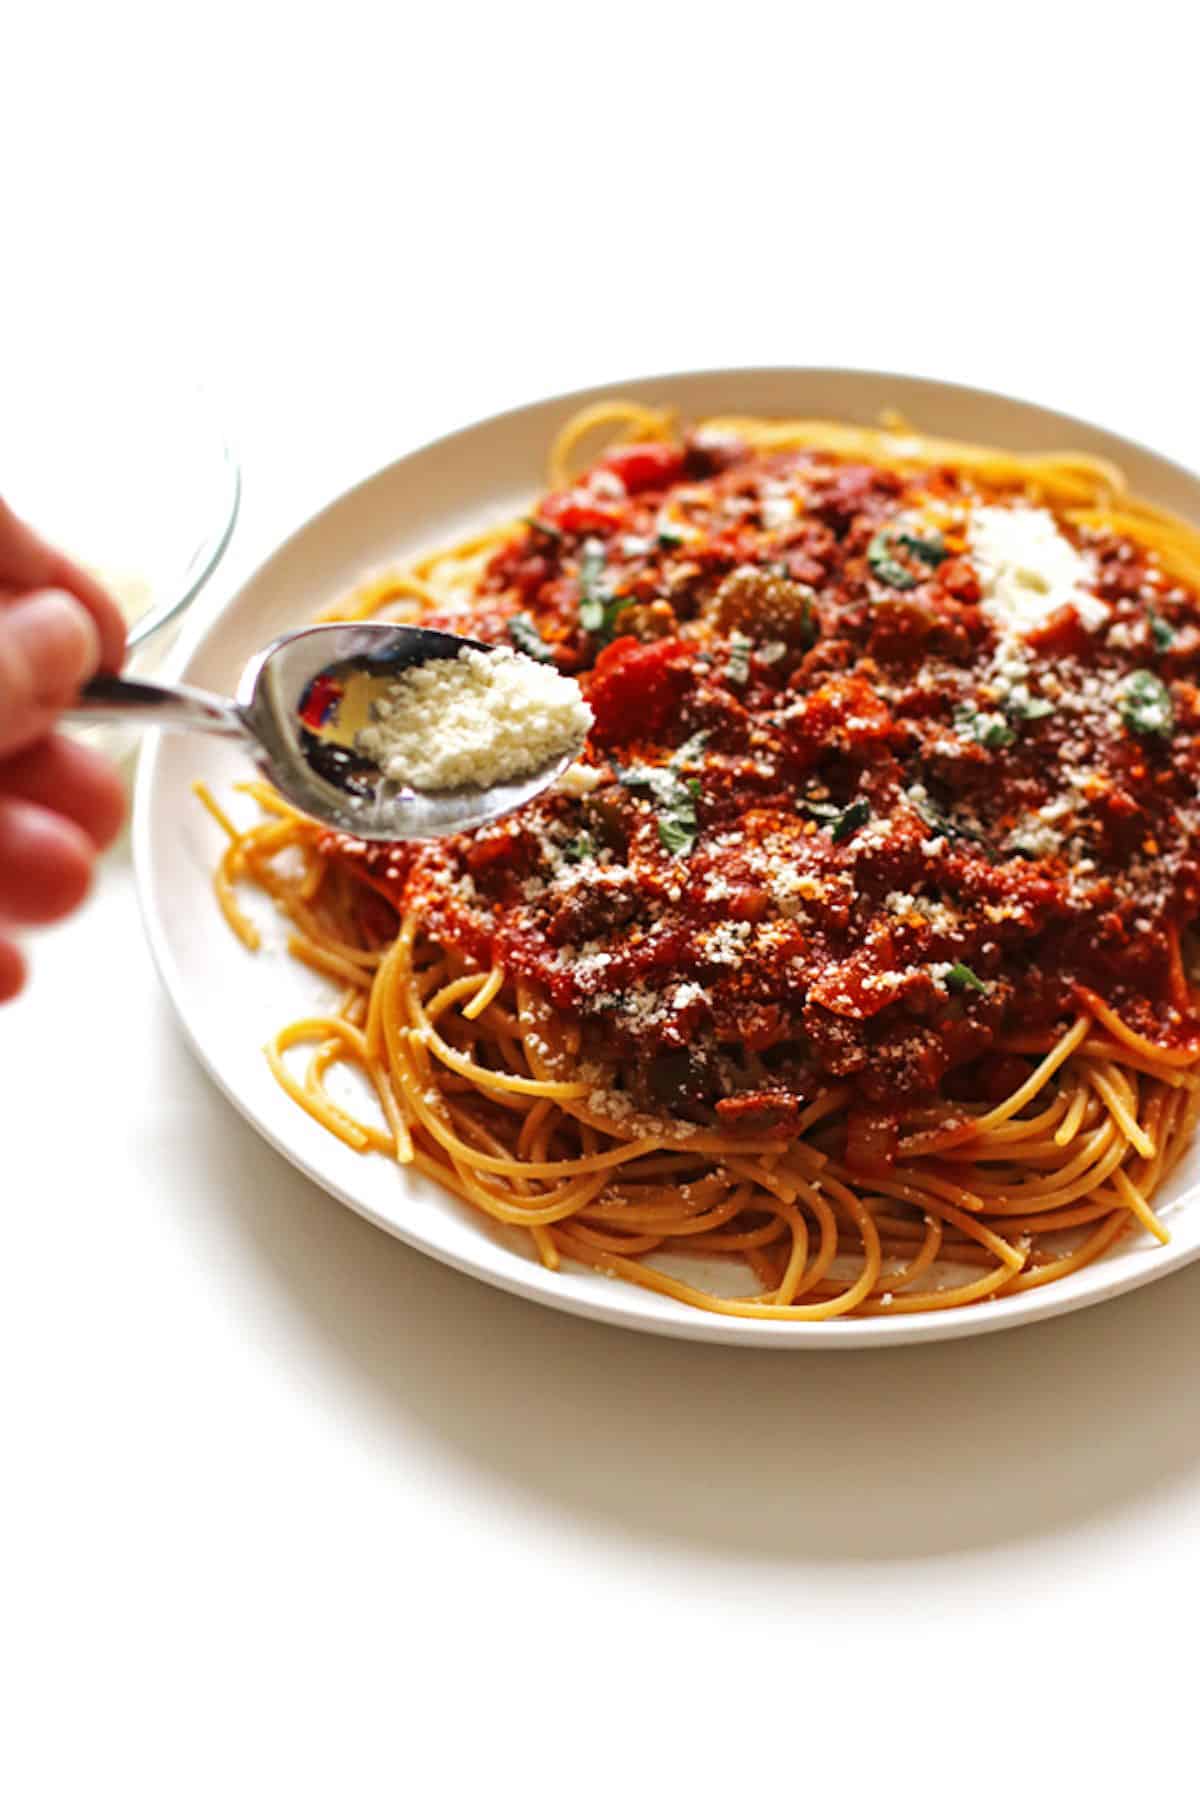 Sprinkling grated Parmesan cheese over a plate full of spaghetti noodles and sauce.